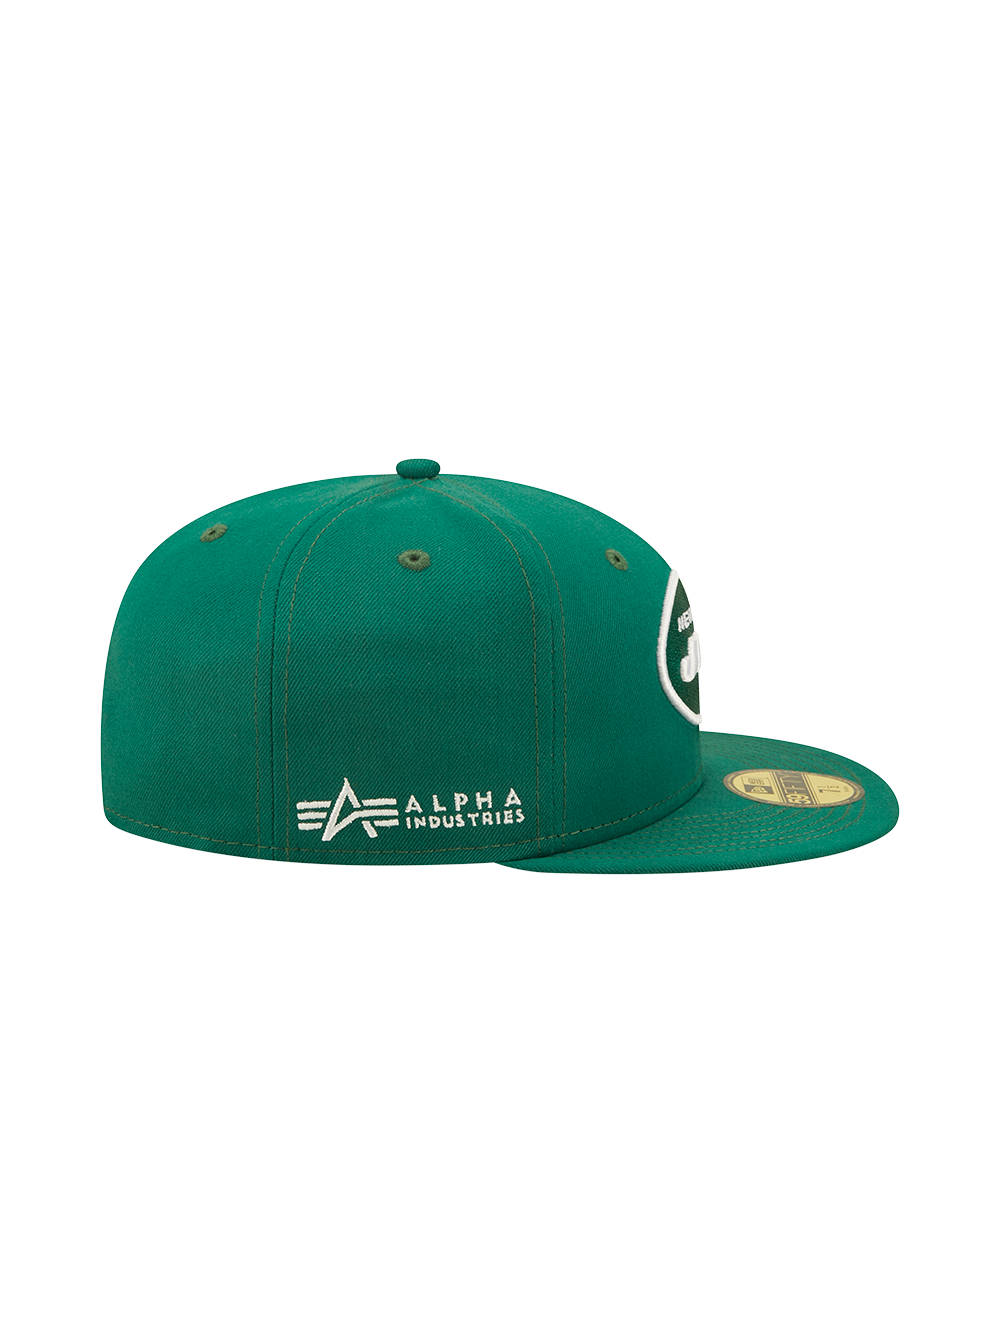 NEW YORK JETS X ALPHA X NEW ERA 59FIFTY FITTED CAP ACCESSORY Alpha Industries 